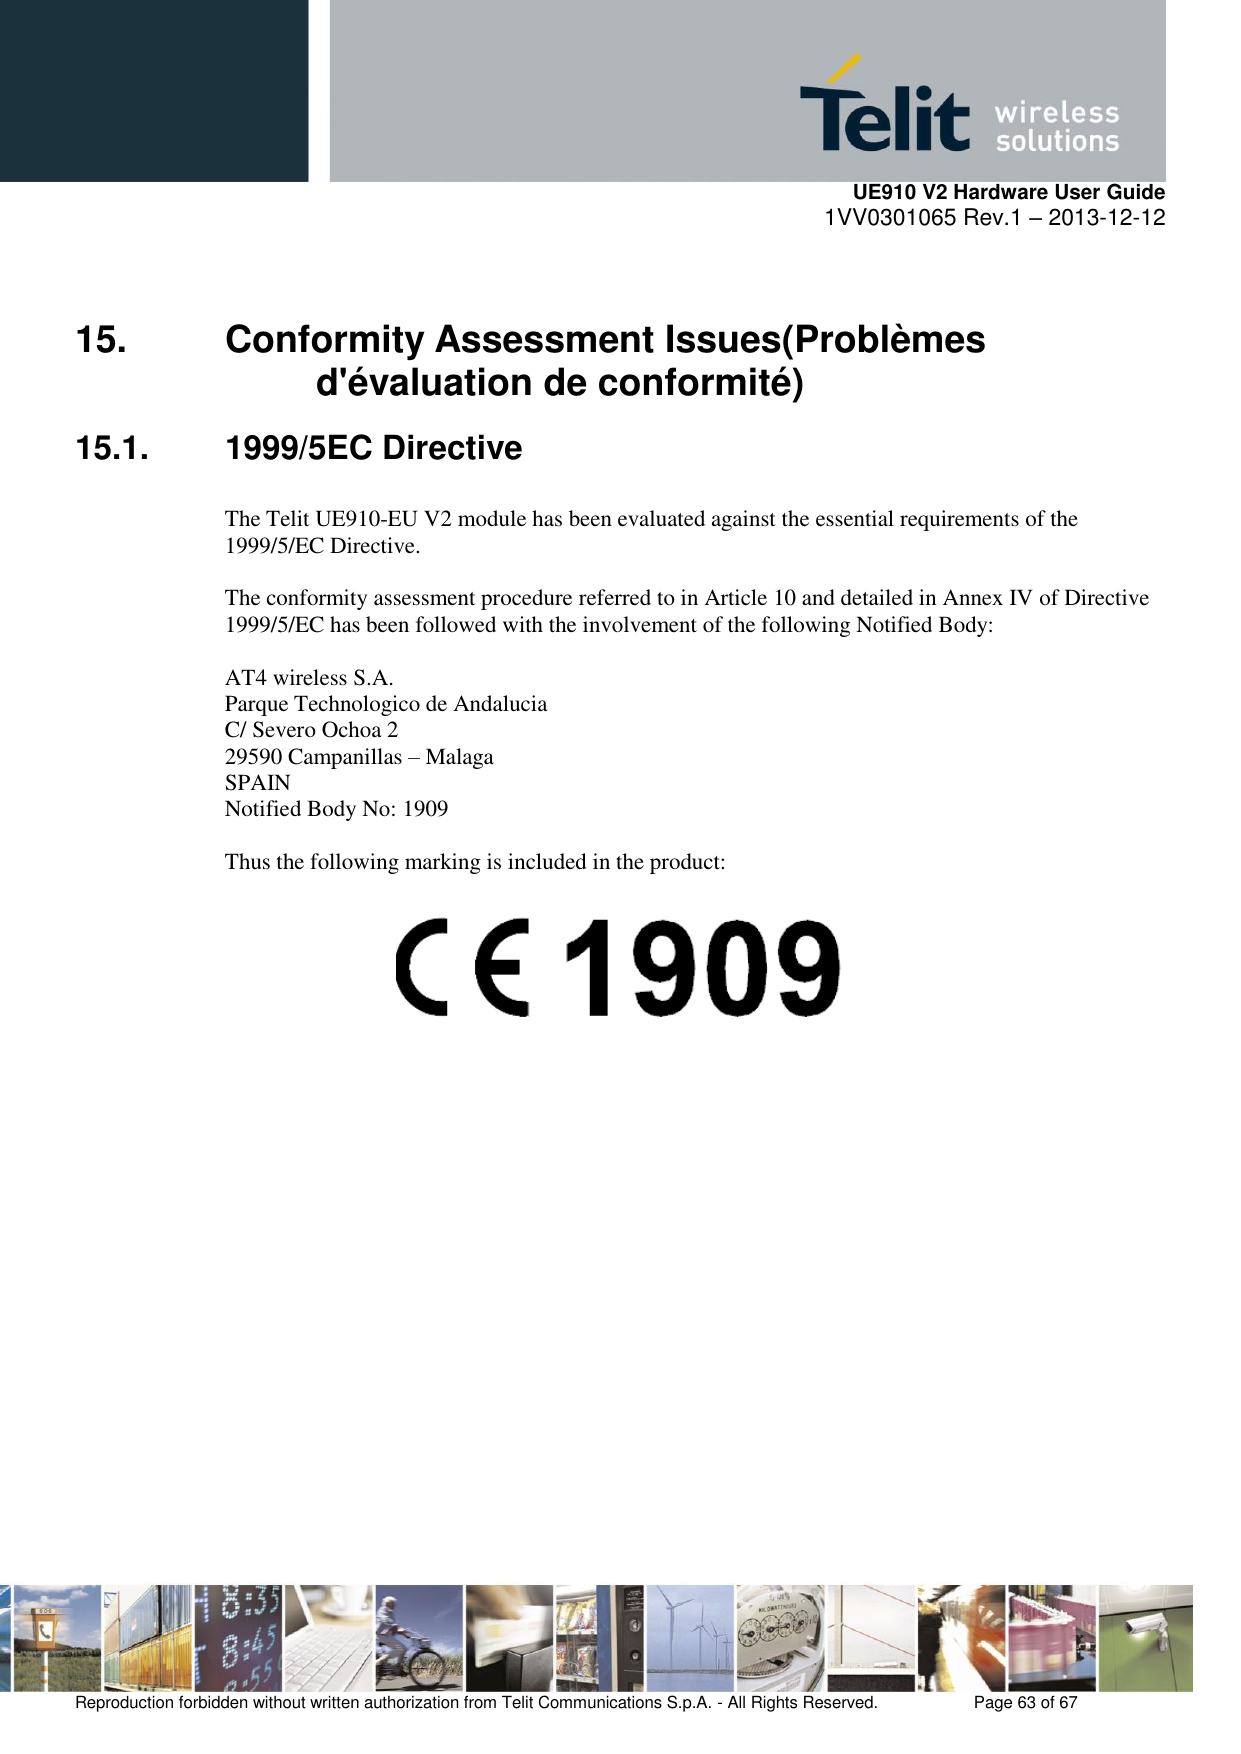     UE910 V2 Hardware User Guide 1VV0301065 Rev.1 – 2013-12-12  Reproduction forbidden without written authorization from Telit Communications S.p.A. - All Rights Reserved.    Page 63 of 67                                                     15.  Conformity Assessment Issues(Problèmes d&apos;évaluation de conformité) 15.1.  1999/5EC Directive  The Telit UE910-EU V2 module has been evaluated against the essential requirements of the  1999/5/EC Directive.  The conformity assessment procedure referred to in Article 10 and detailed in Annex IV of Directive  1999/5/EC has been followed with the involvement of the following Notified Body:  AT4 wireless S.A. Parque Technologico de Andalucia C/ Severo Ochoa 2 29590 Campanillas – Malaga SPAIN Notified Body No: 1909  Thus the following marking is included in the product:                